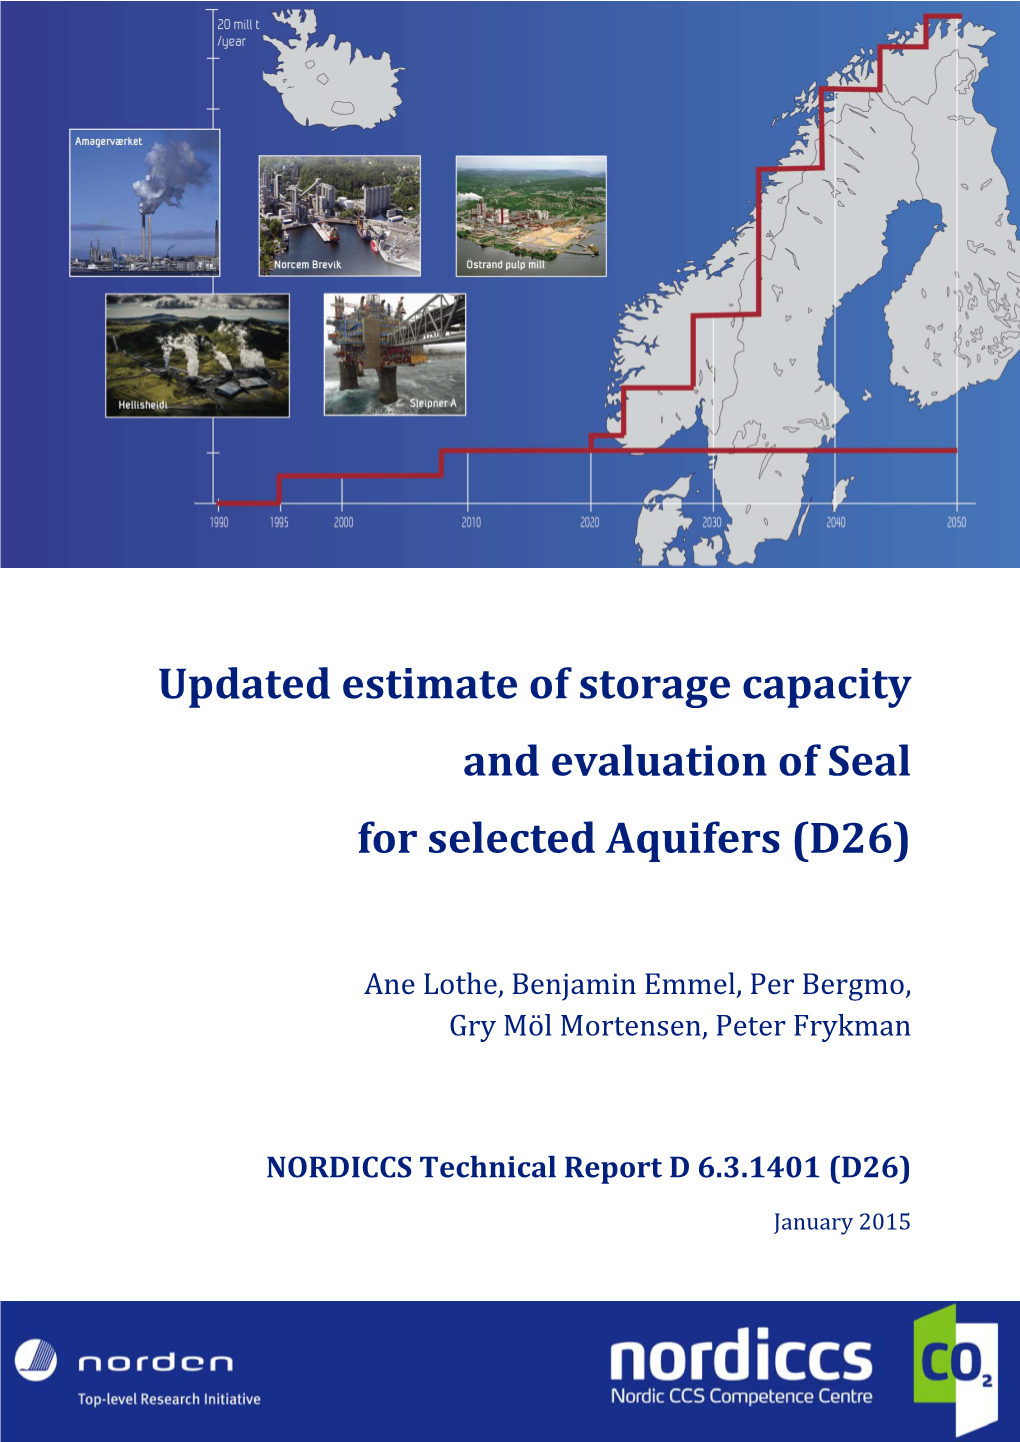 Updated Estimate of Storage Capacity and Evaluation of Seal for Selected Aquifers (D26)